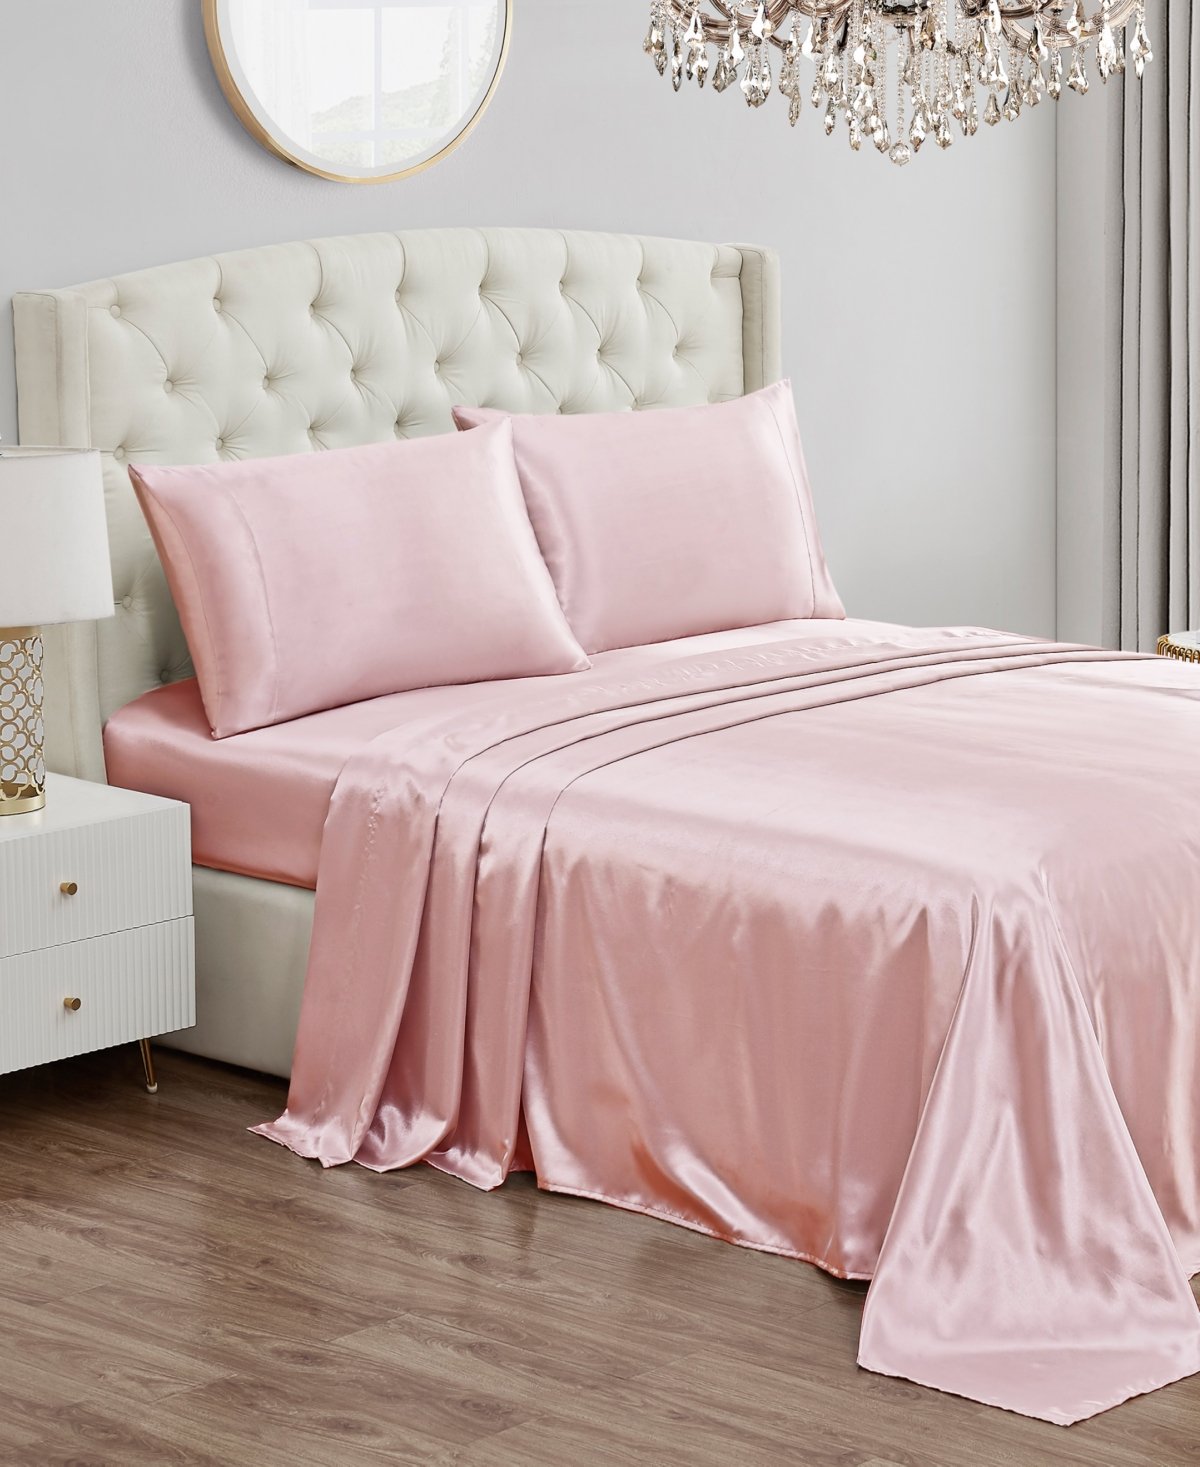 Juicy Couture 3 Piece Satin Sheet Set, Twin/twin Xl In Pink